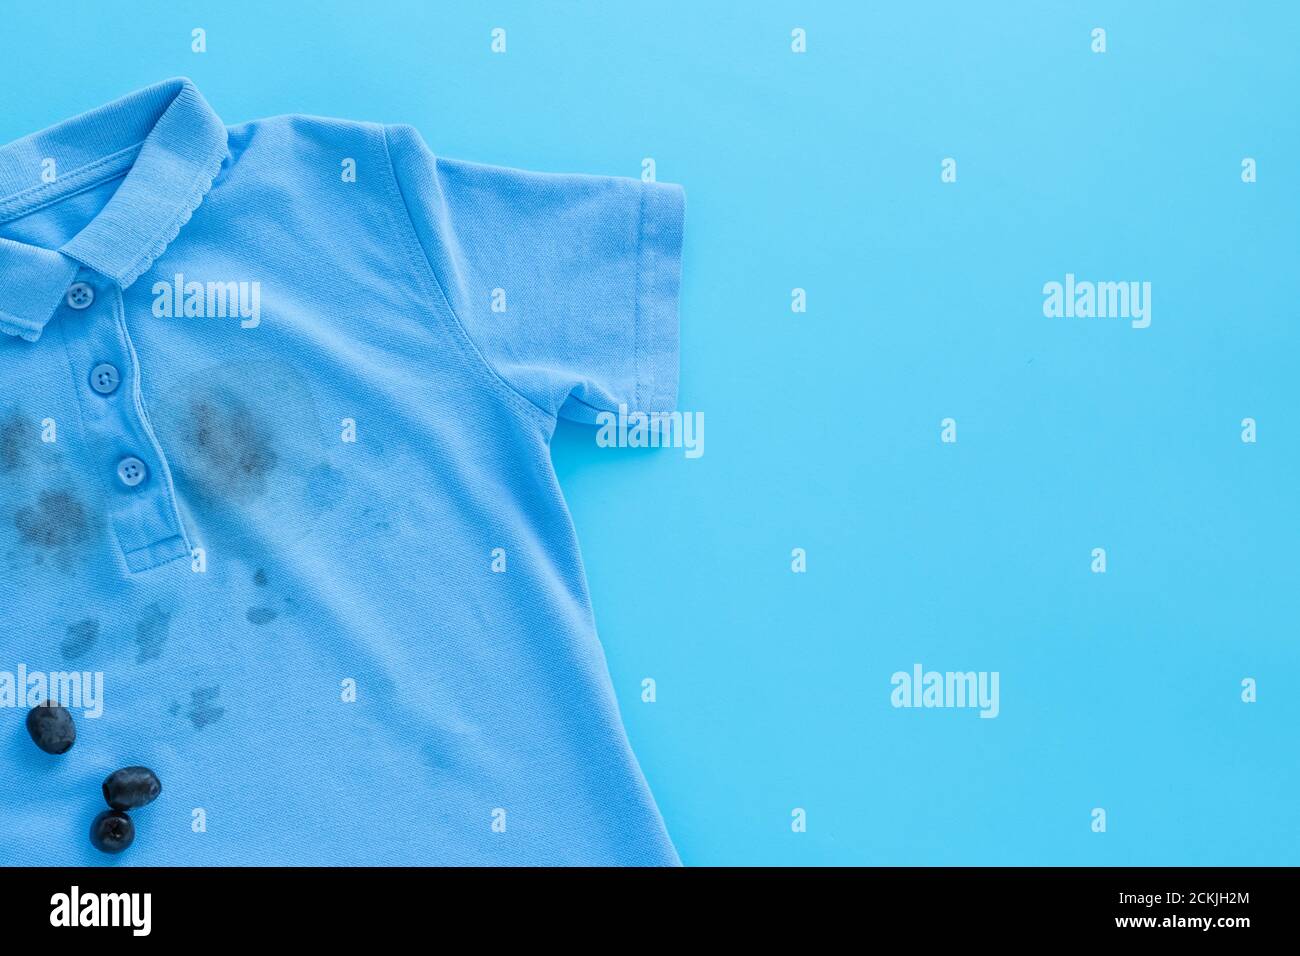 close up dirty stain of black olives on clothes Stock Photo